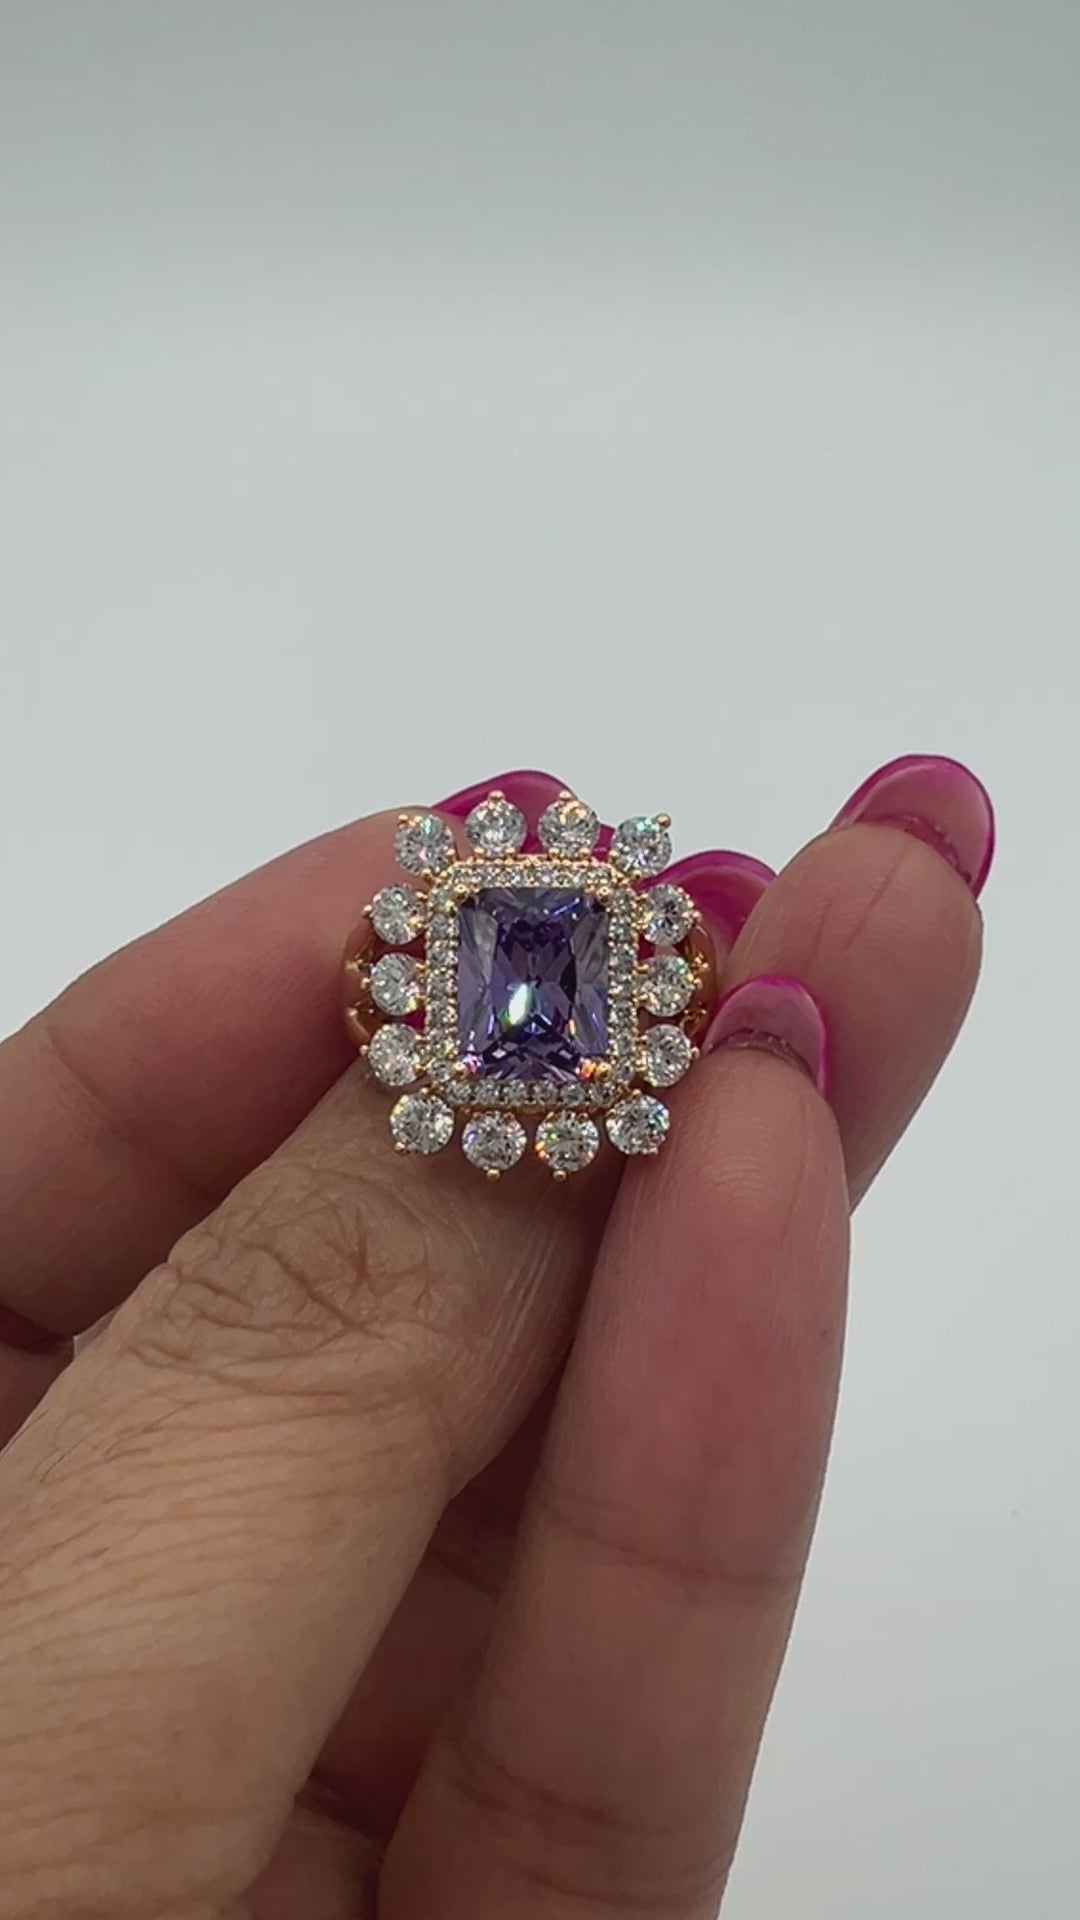 ring video of a purple and white gold plated ring 5 stars reviewson google